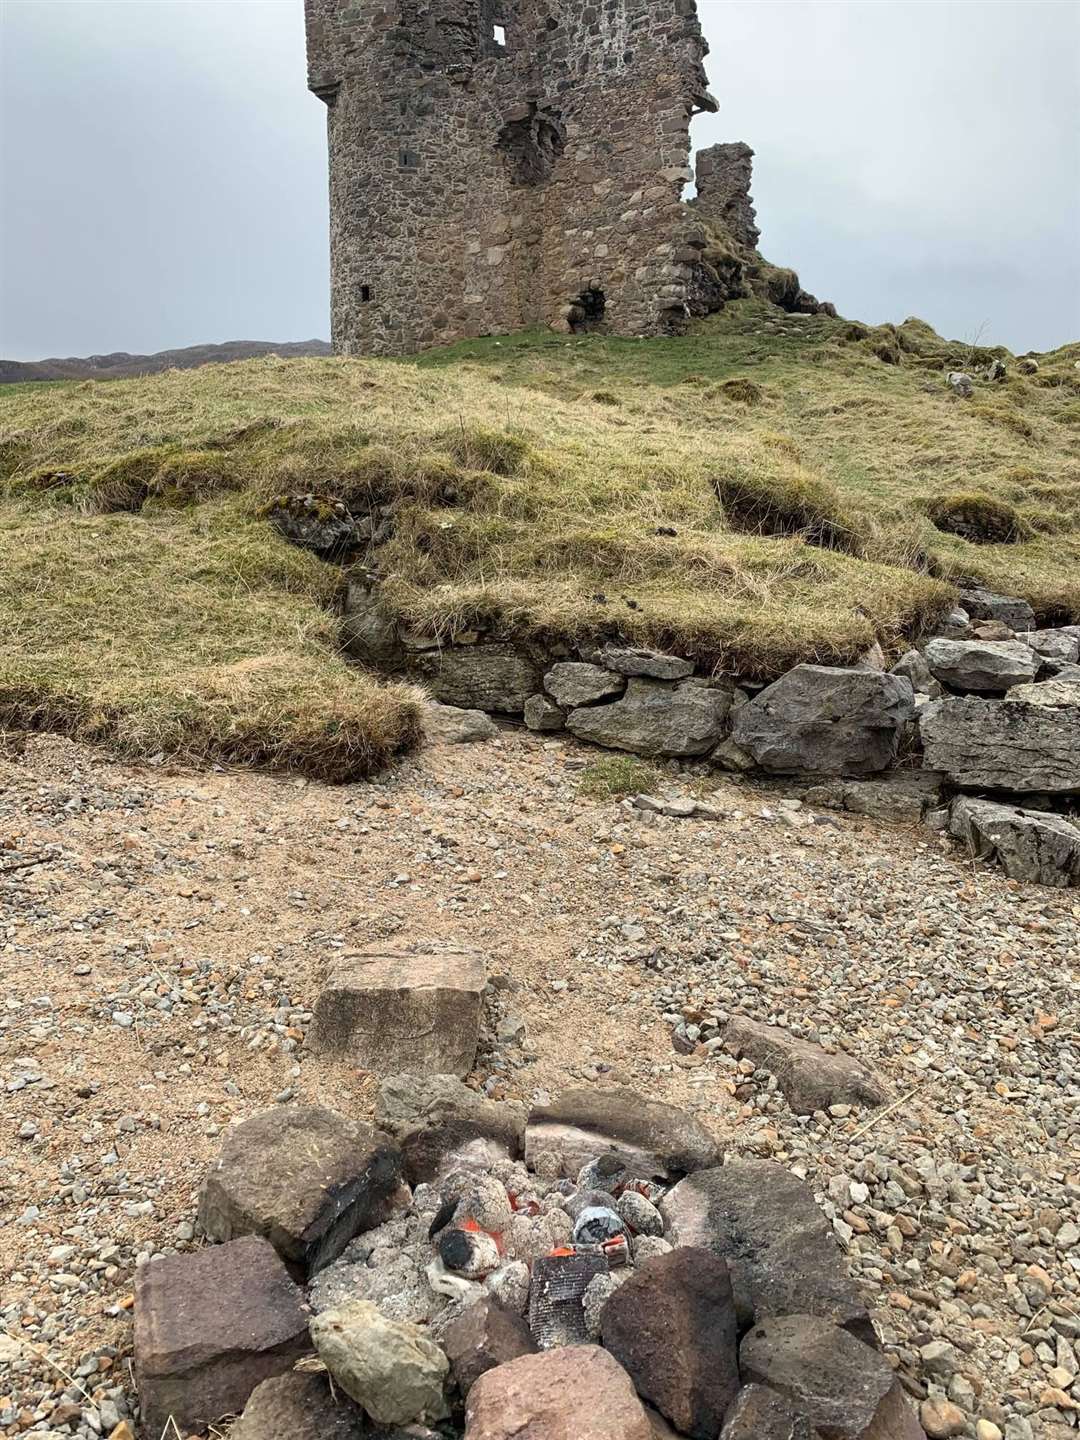 A fire lit by wild campers in 2020 just a stone's throw away from the 16th century Ardvreck Castle. Picture: Jane Mackenzie for The Land Weeps